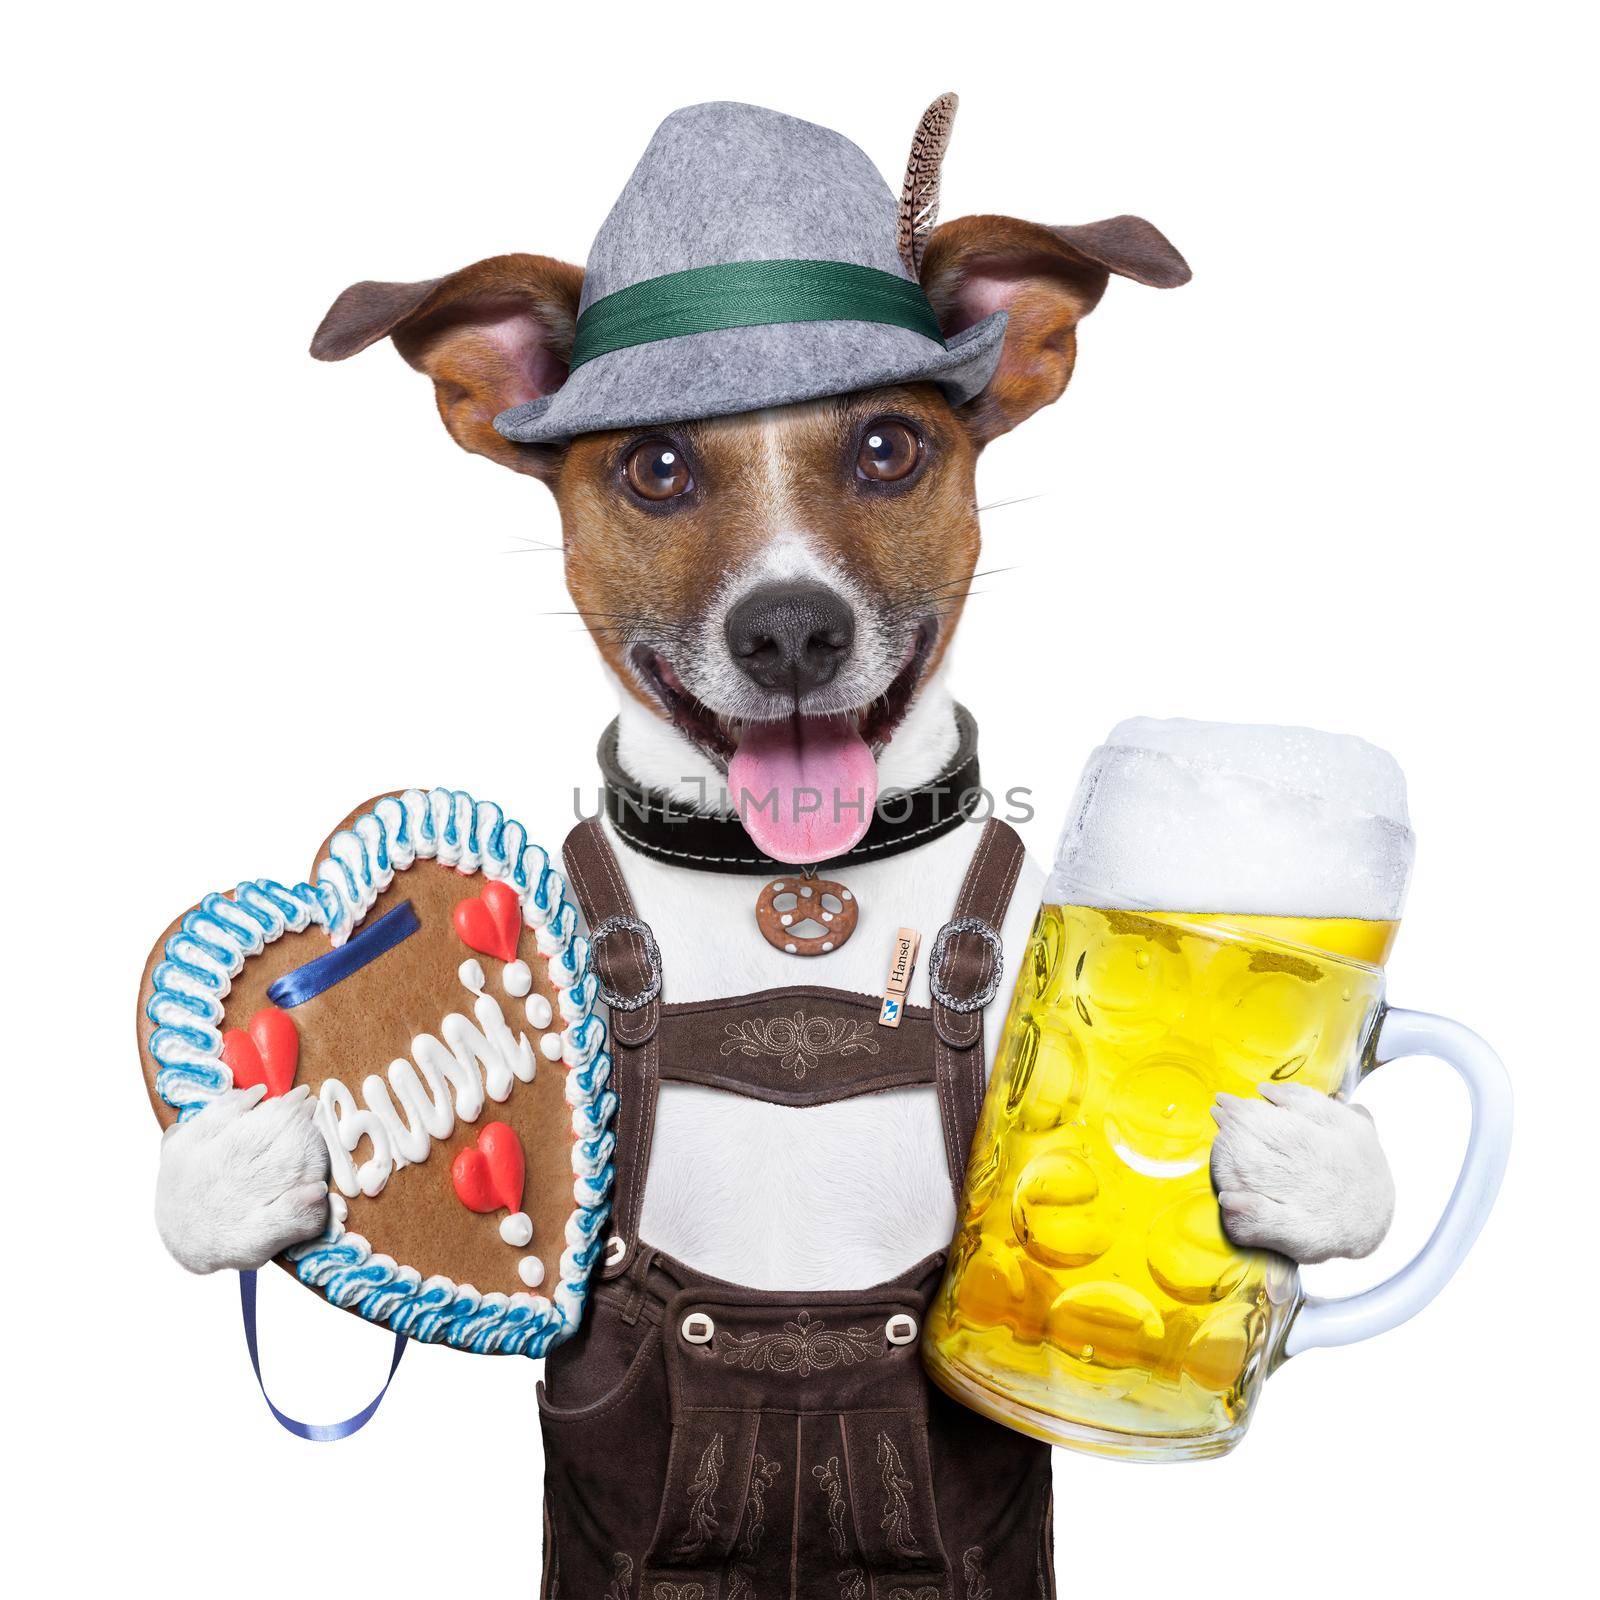 oktoberfest dog with beer mug and gingerbread heart, smiling happy